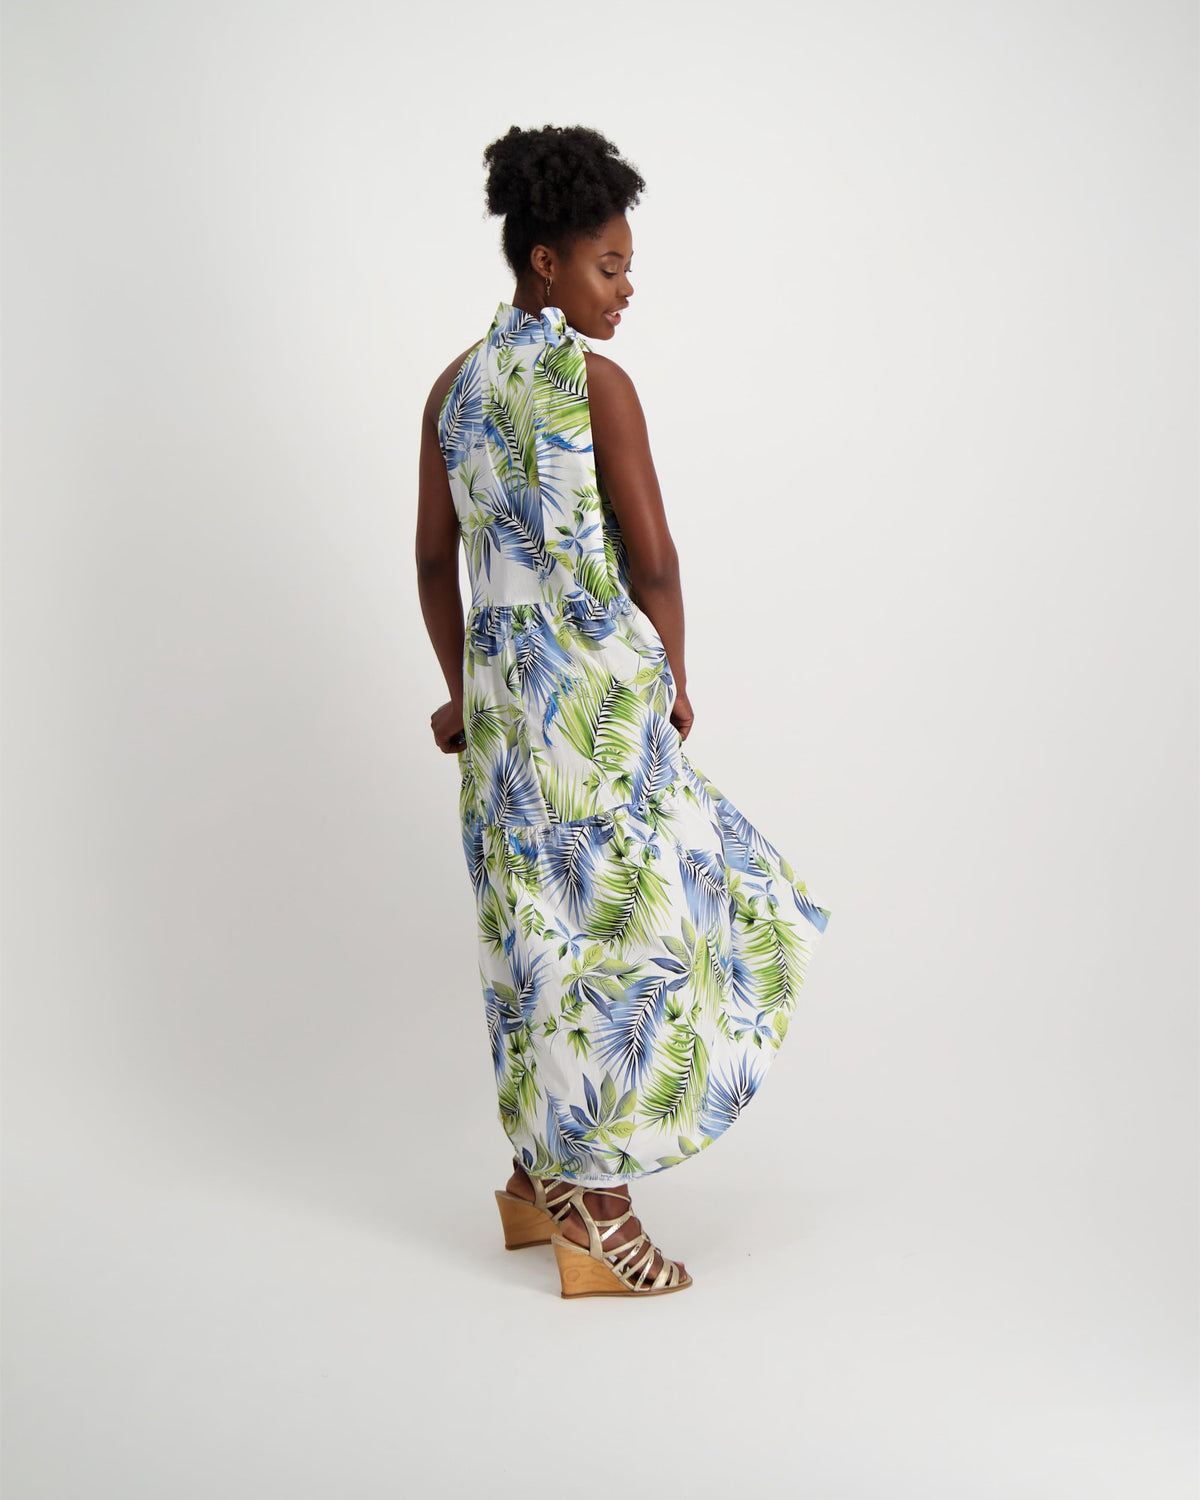 Gorgeous, hand-made, maxi-length halter neck dress, in fresh summer patterned fabric. Worn with wedge strap sandals.